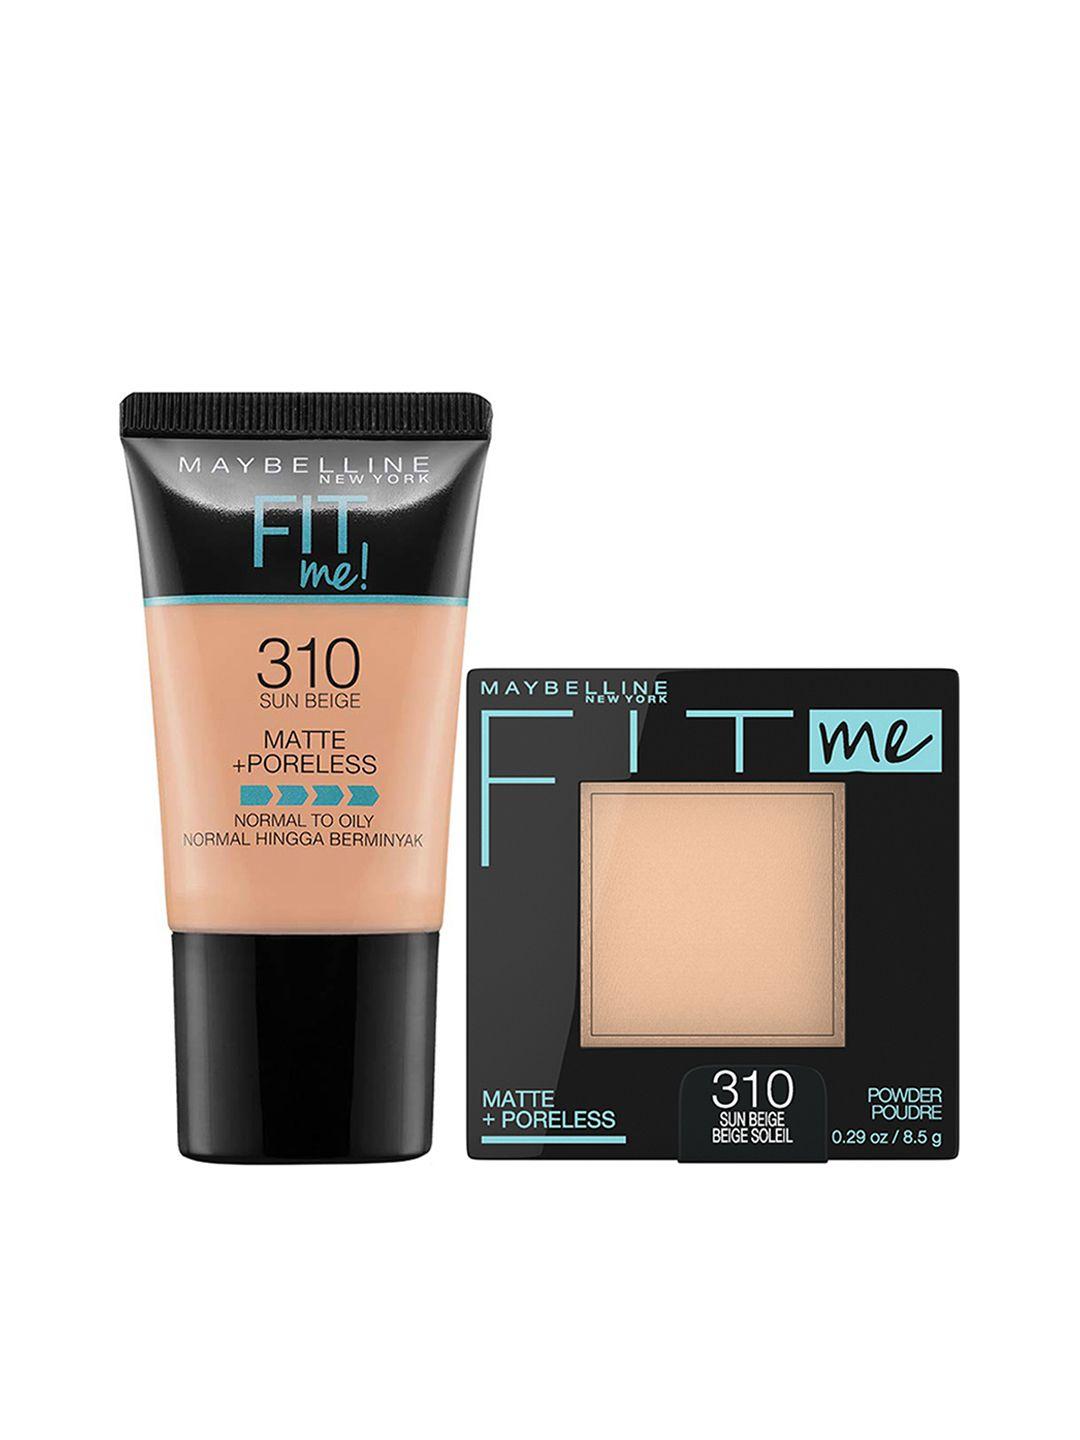 maybelline new york fit me as i am kit - foundation 310 & pressed powder 310